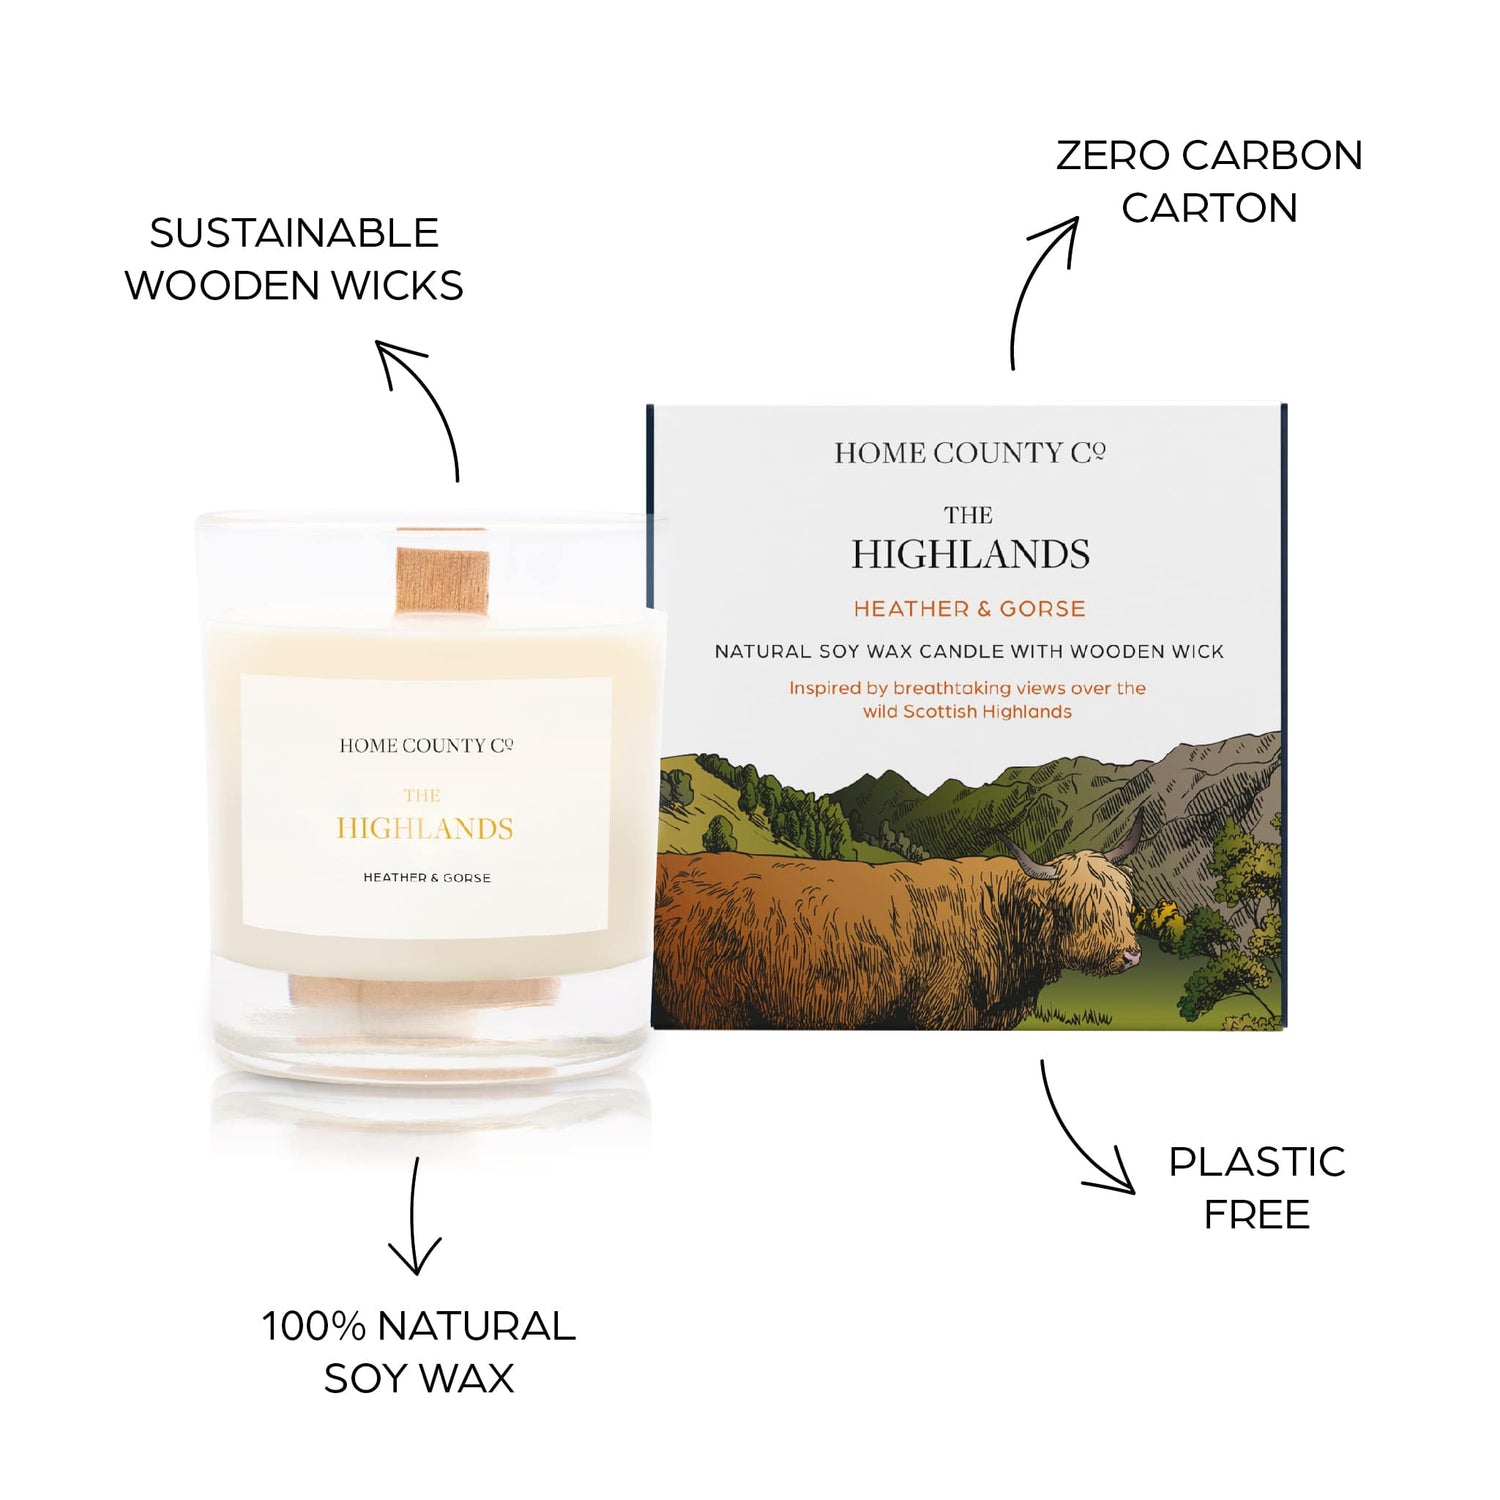 Sustainable candle credentials are shown around the heather scented candle image - sustainable wooden wicks, zero carbon carton, 100% natural soy wax, plastic free